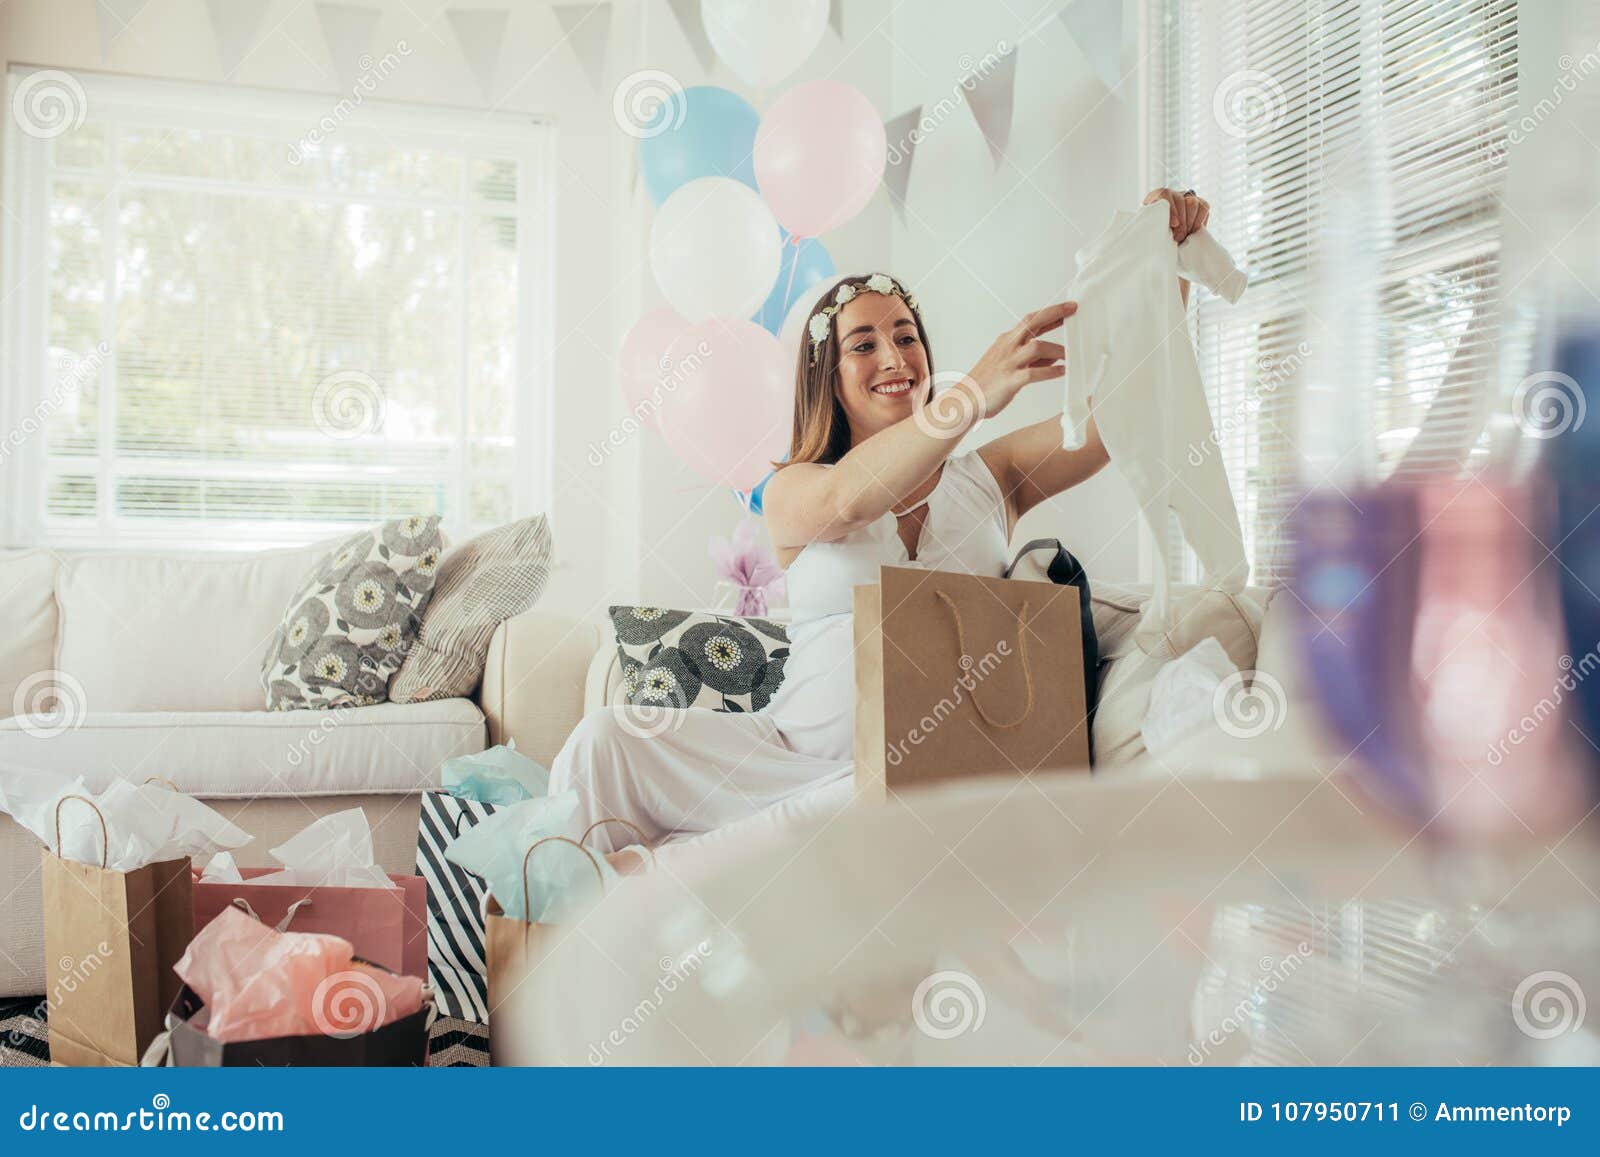 Pregnant Woman Opening A New Gift After Baby Shower Stock ...